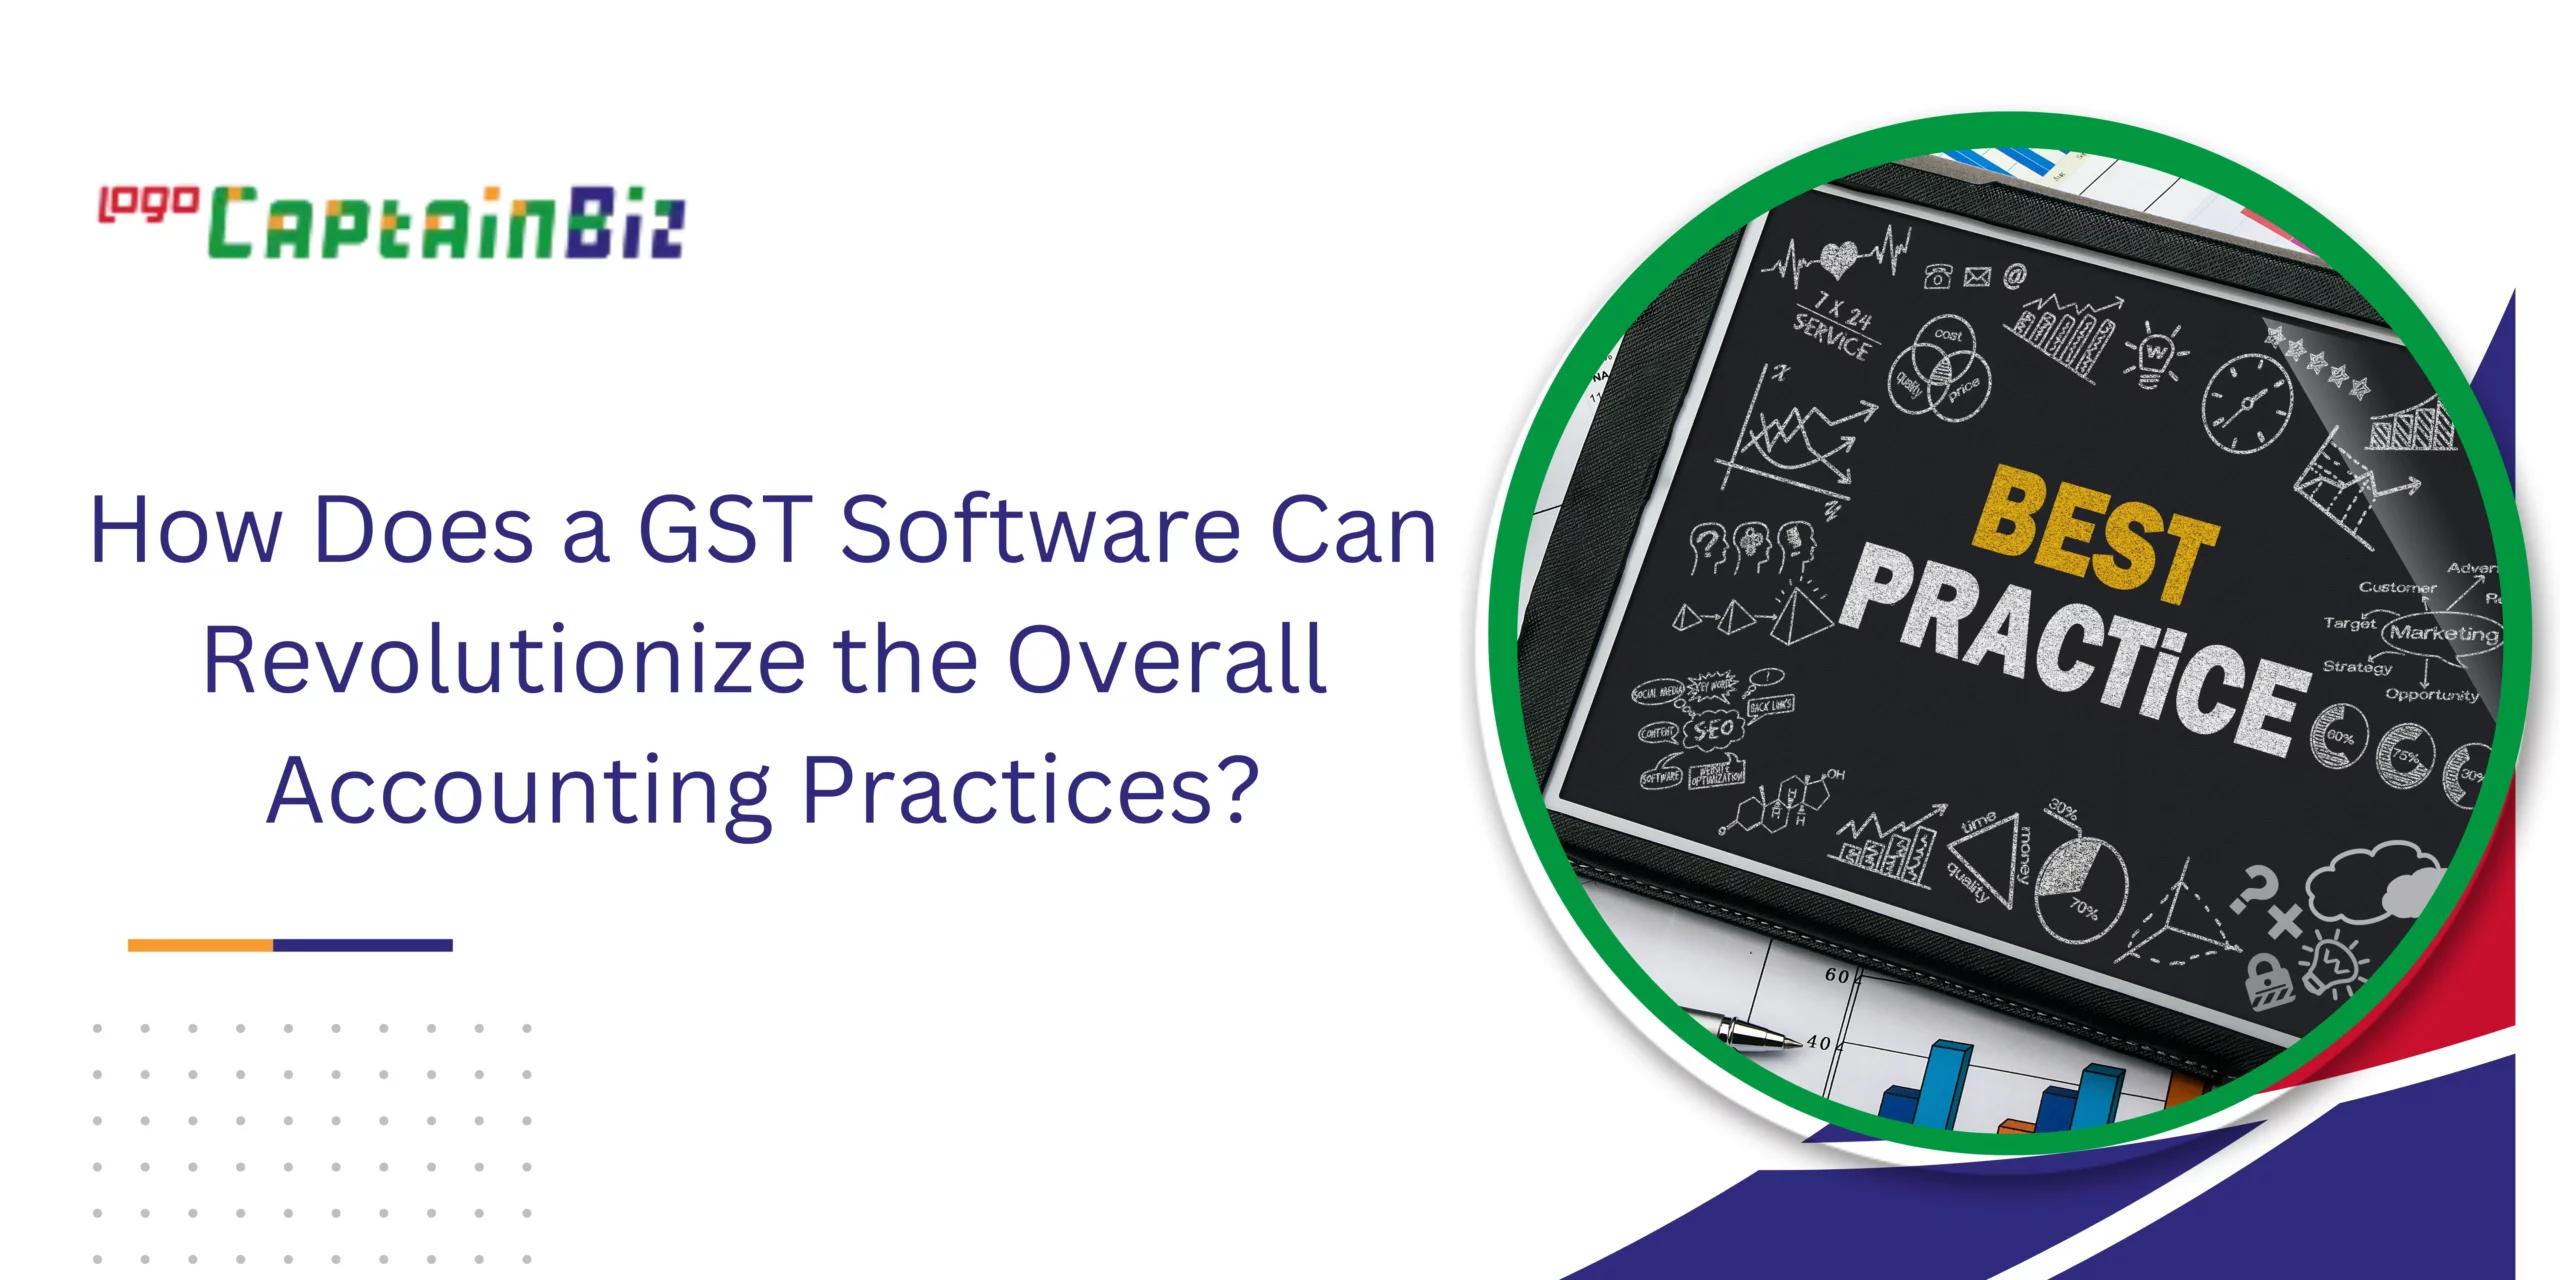 CaptainBiz: How Does a GST Software Can Revolutionize the Overall Accounting Practices